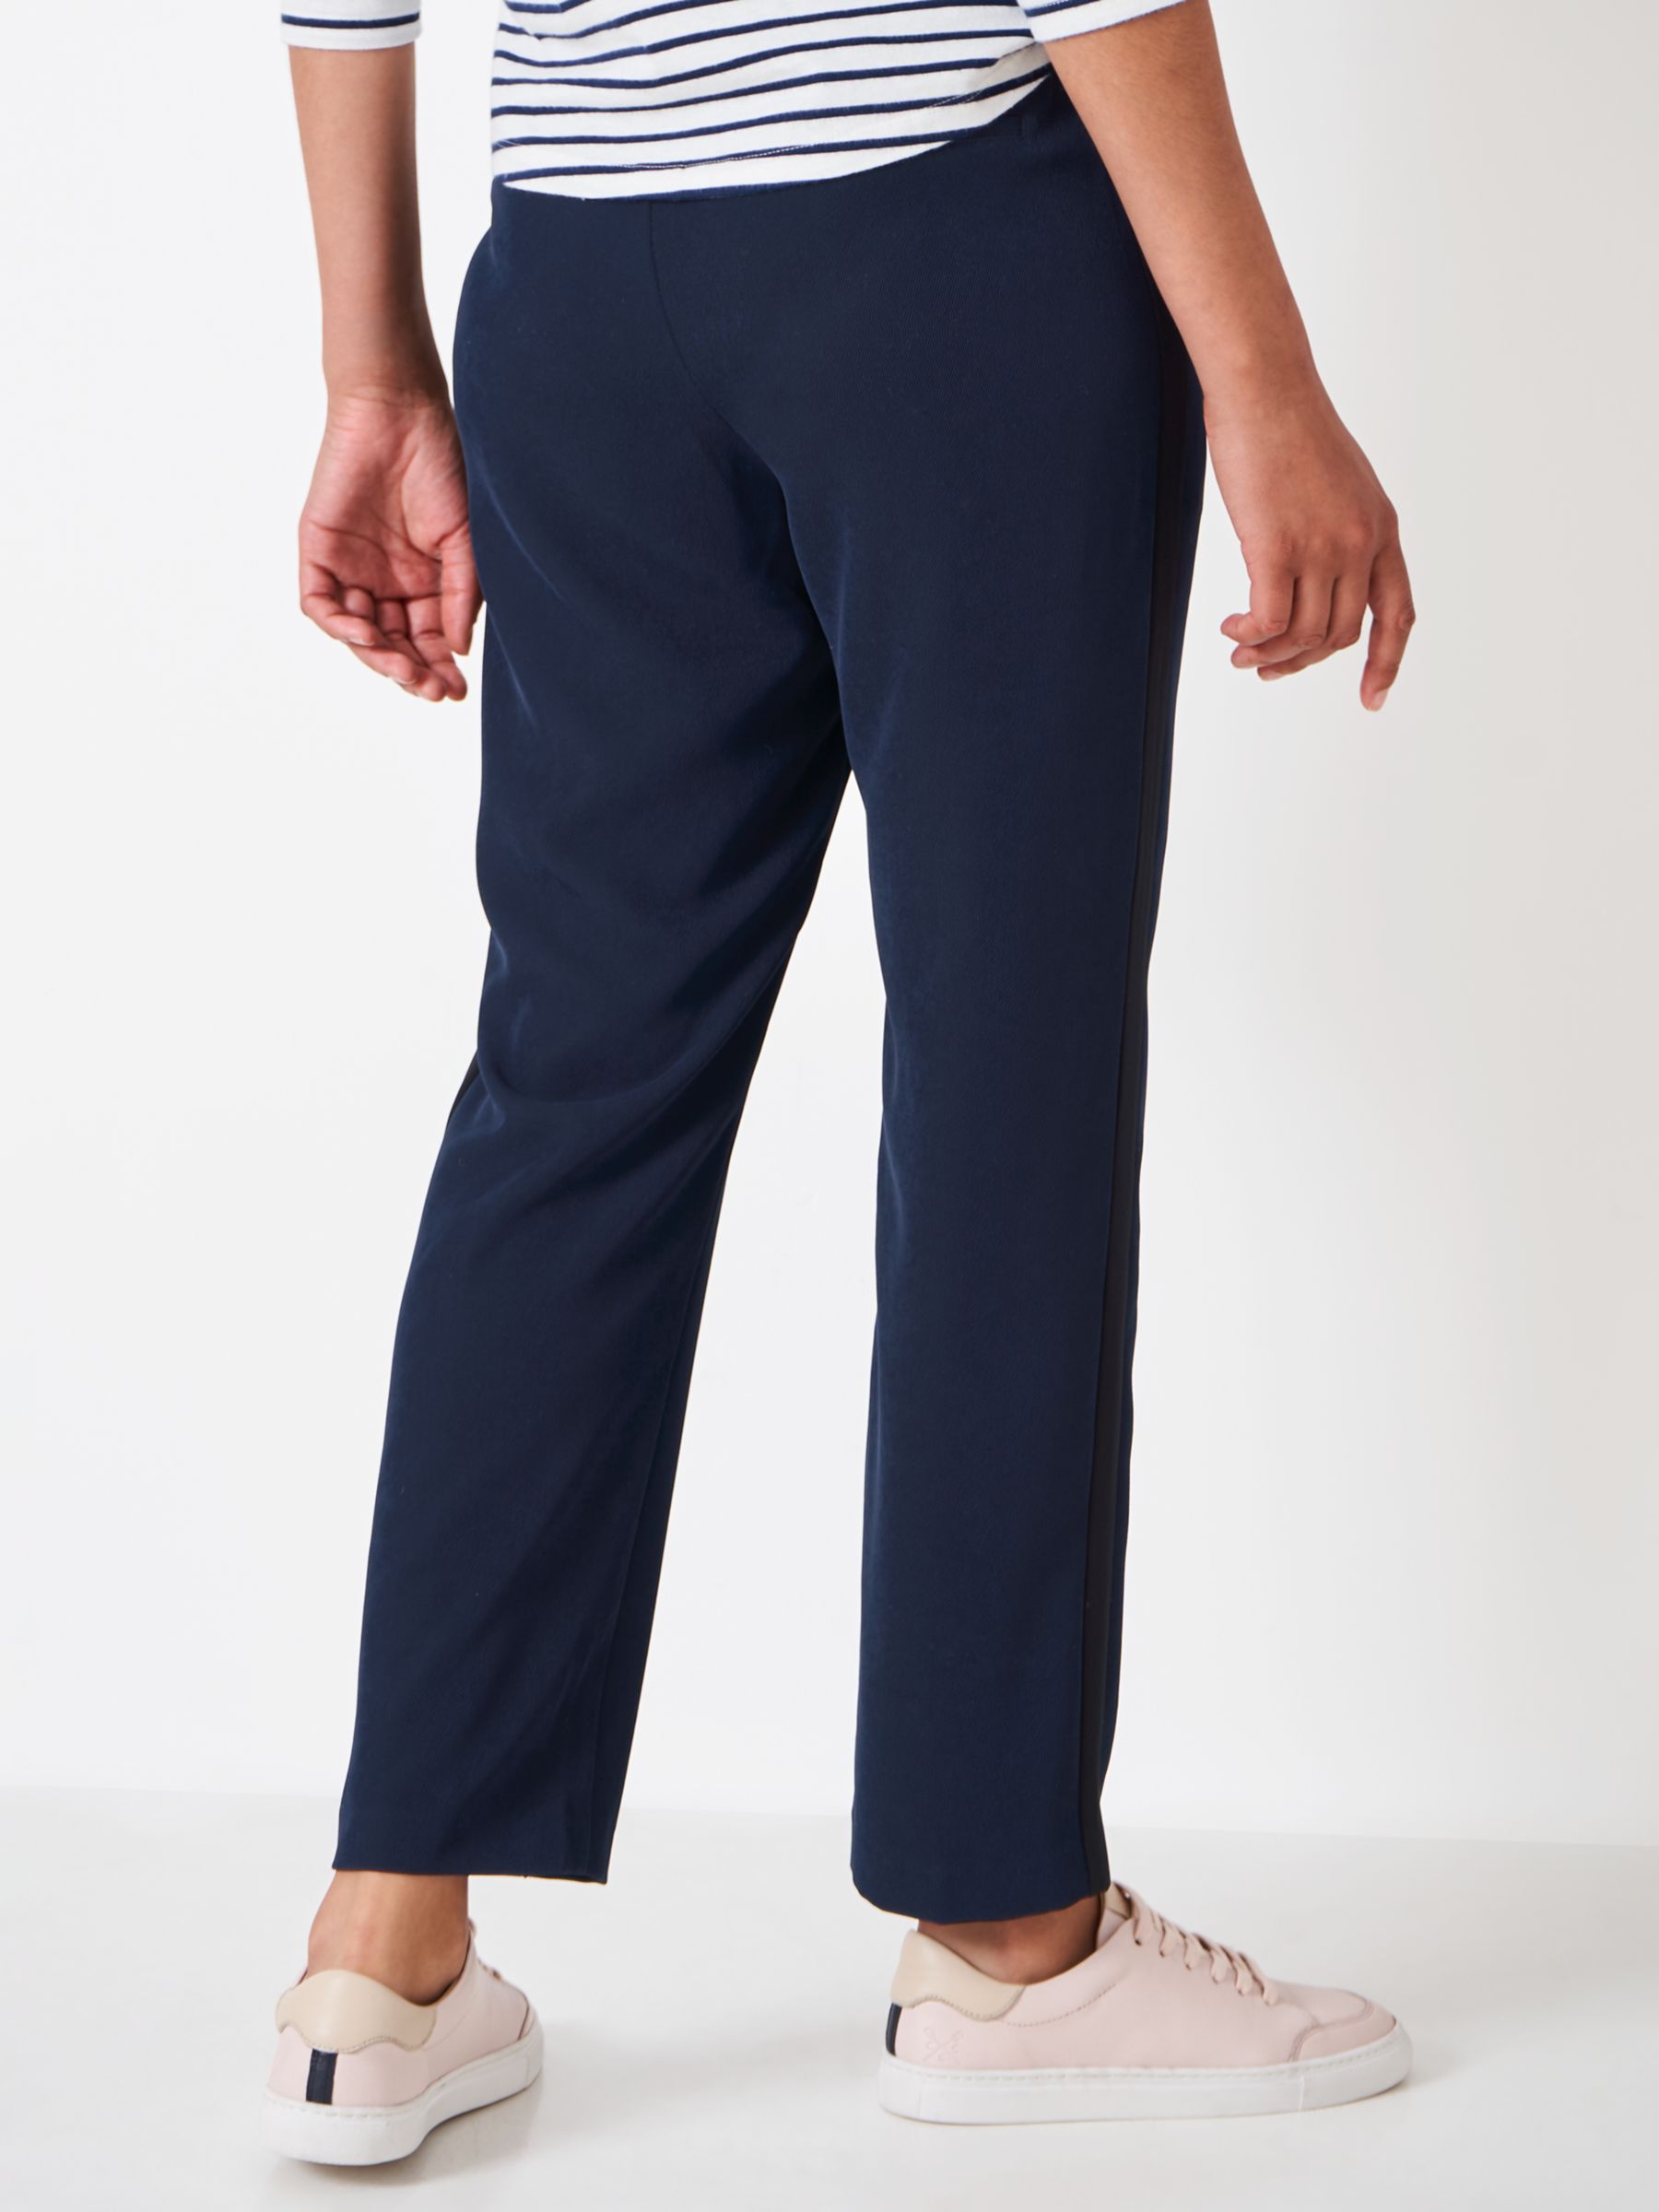 Buy Crew Clothing Hoxton Tapered Trouser, Navy Online at johnlewis.com